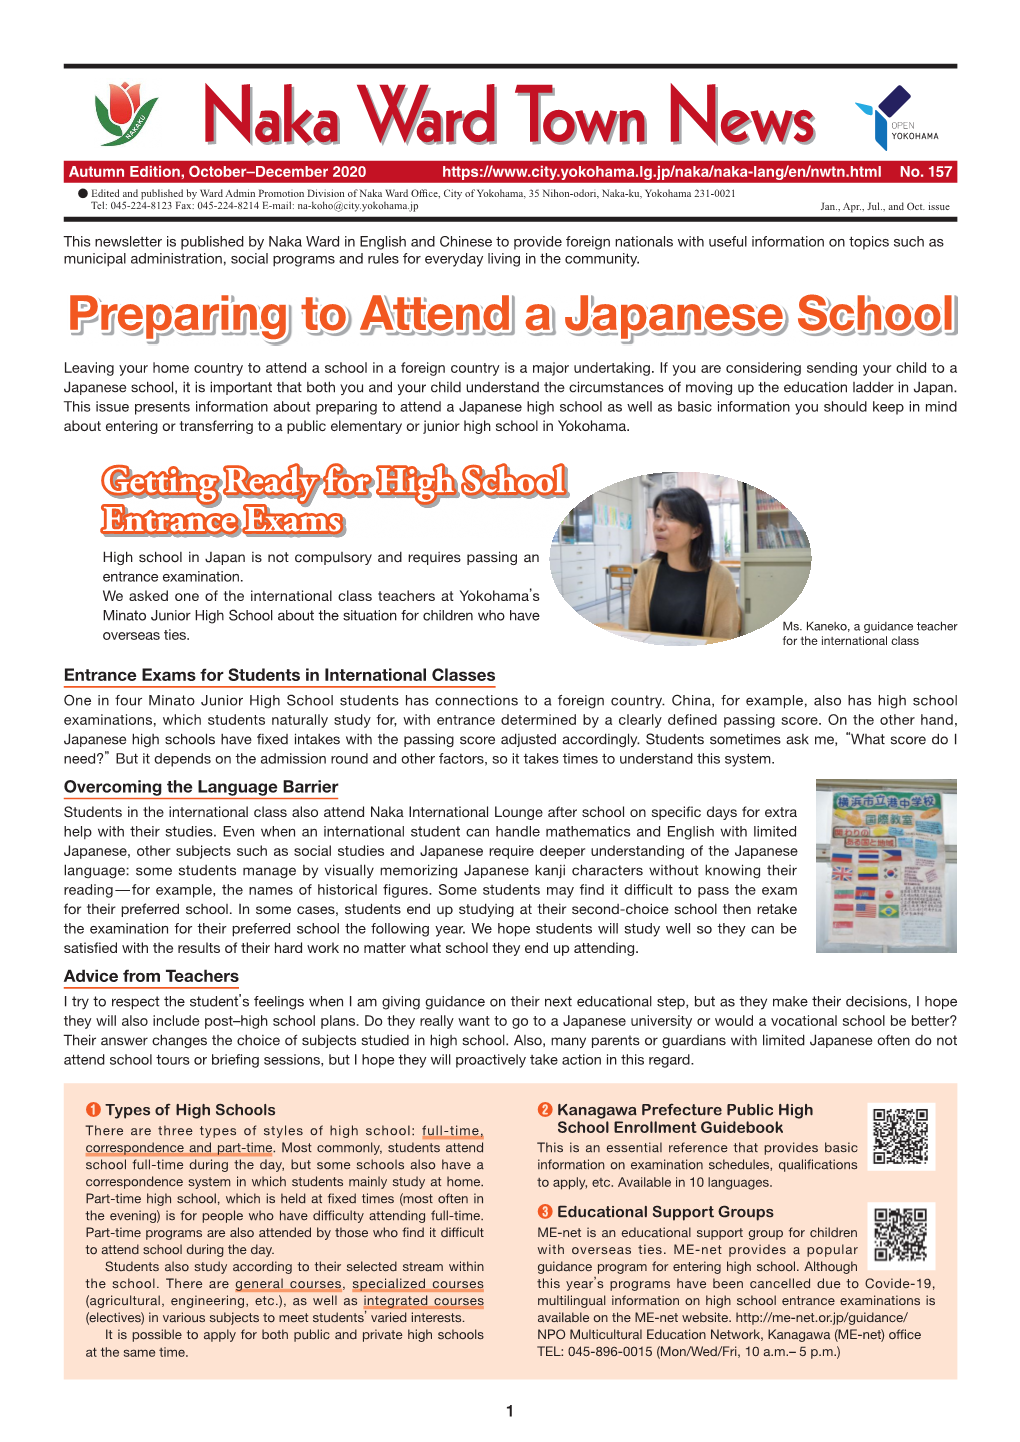 Preparing to Attend a Japanese School